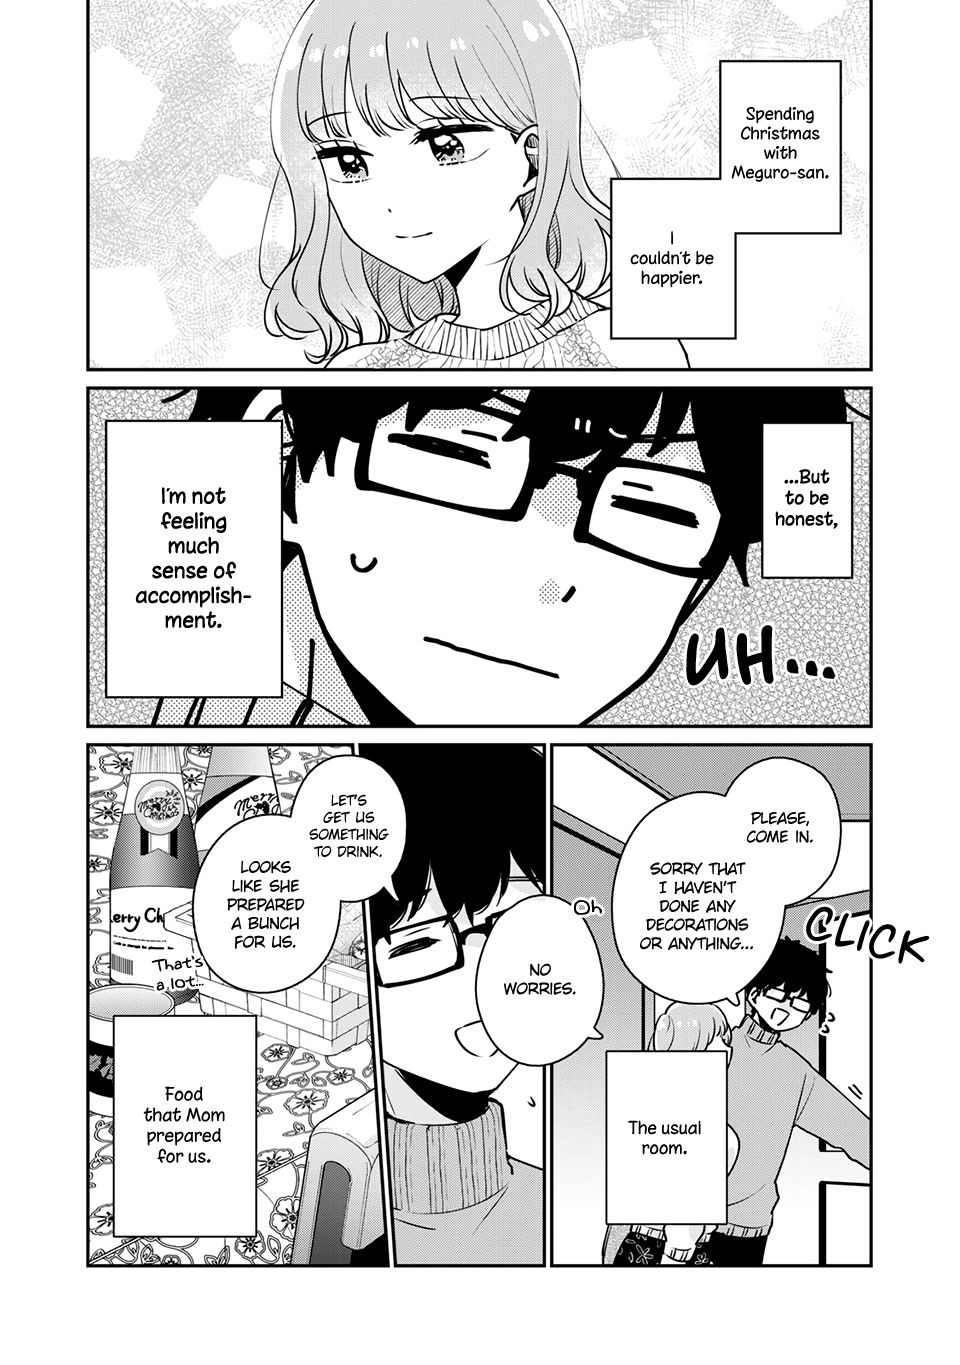 It's Not Meguro-san's First Time chapter 38 page 3